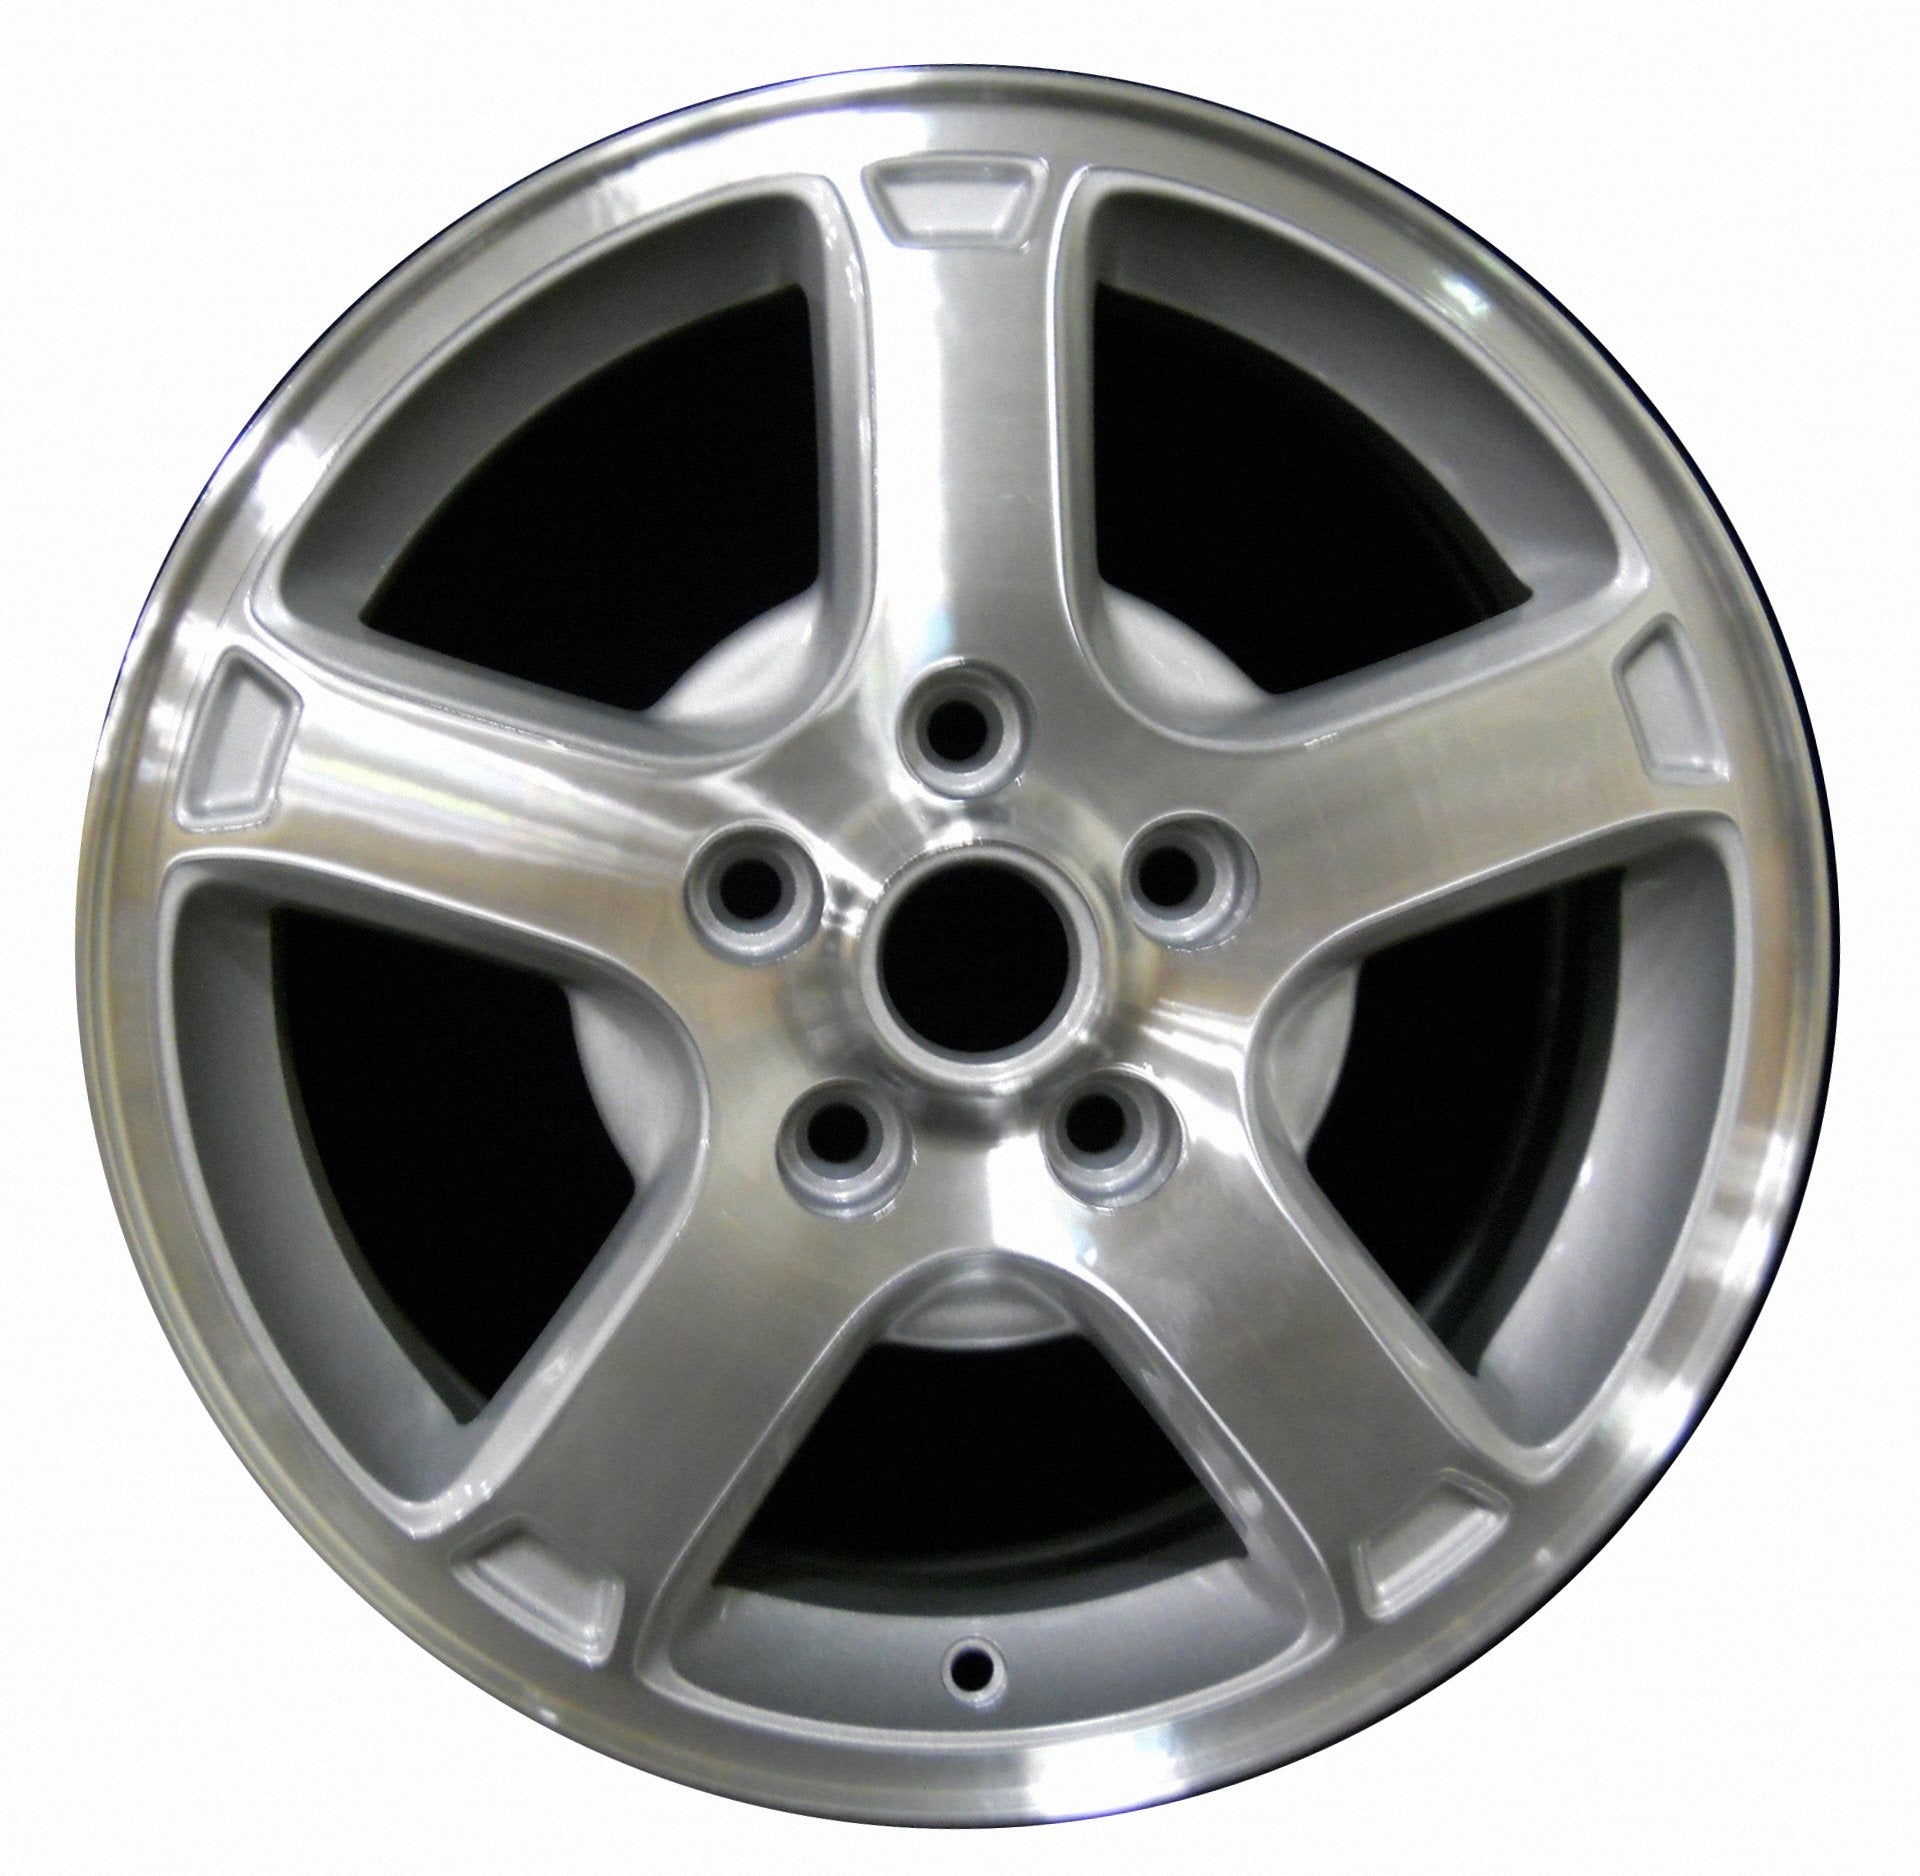 Chevrolet Monte Carlo  2003 Factory OEM Car Wheel Size 16x6.5 Alloy WAO.5164.PS02.MA